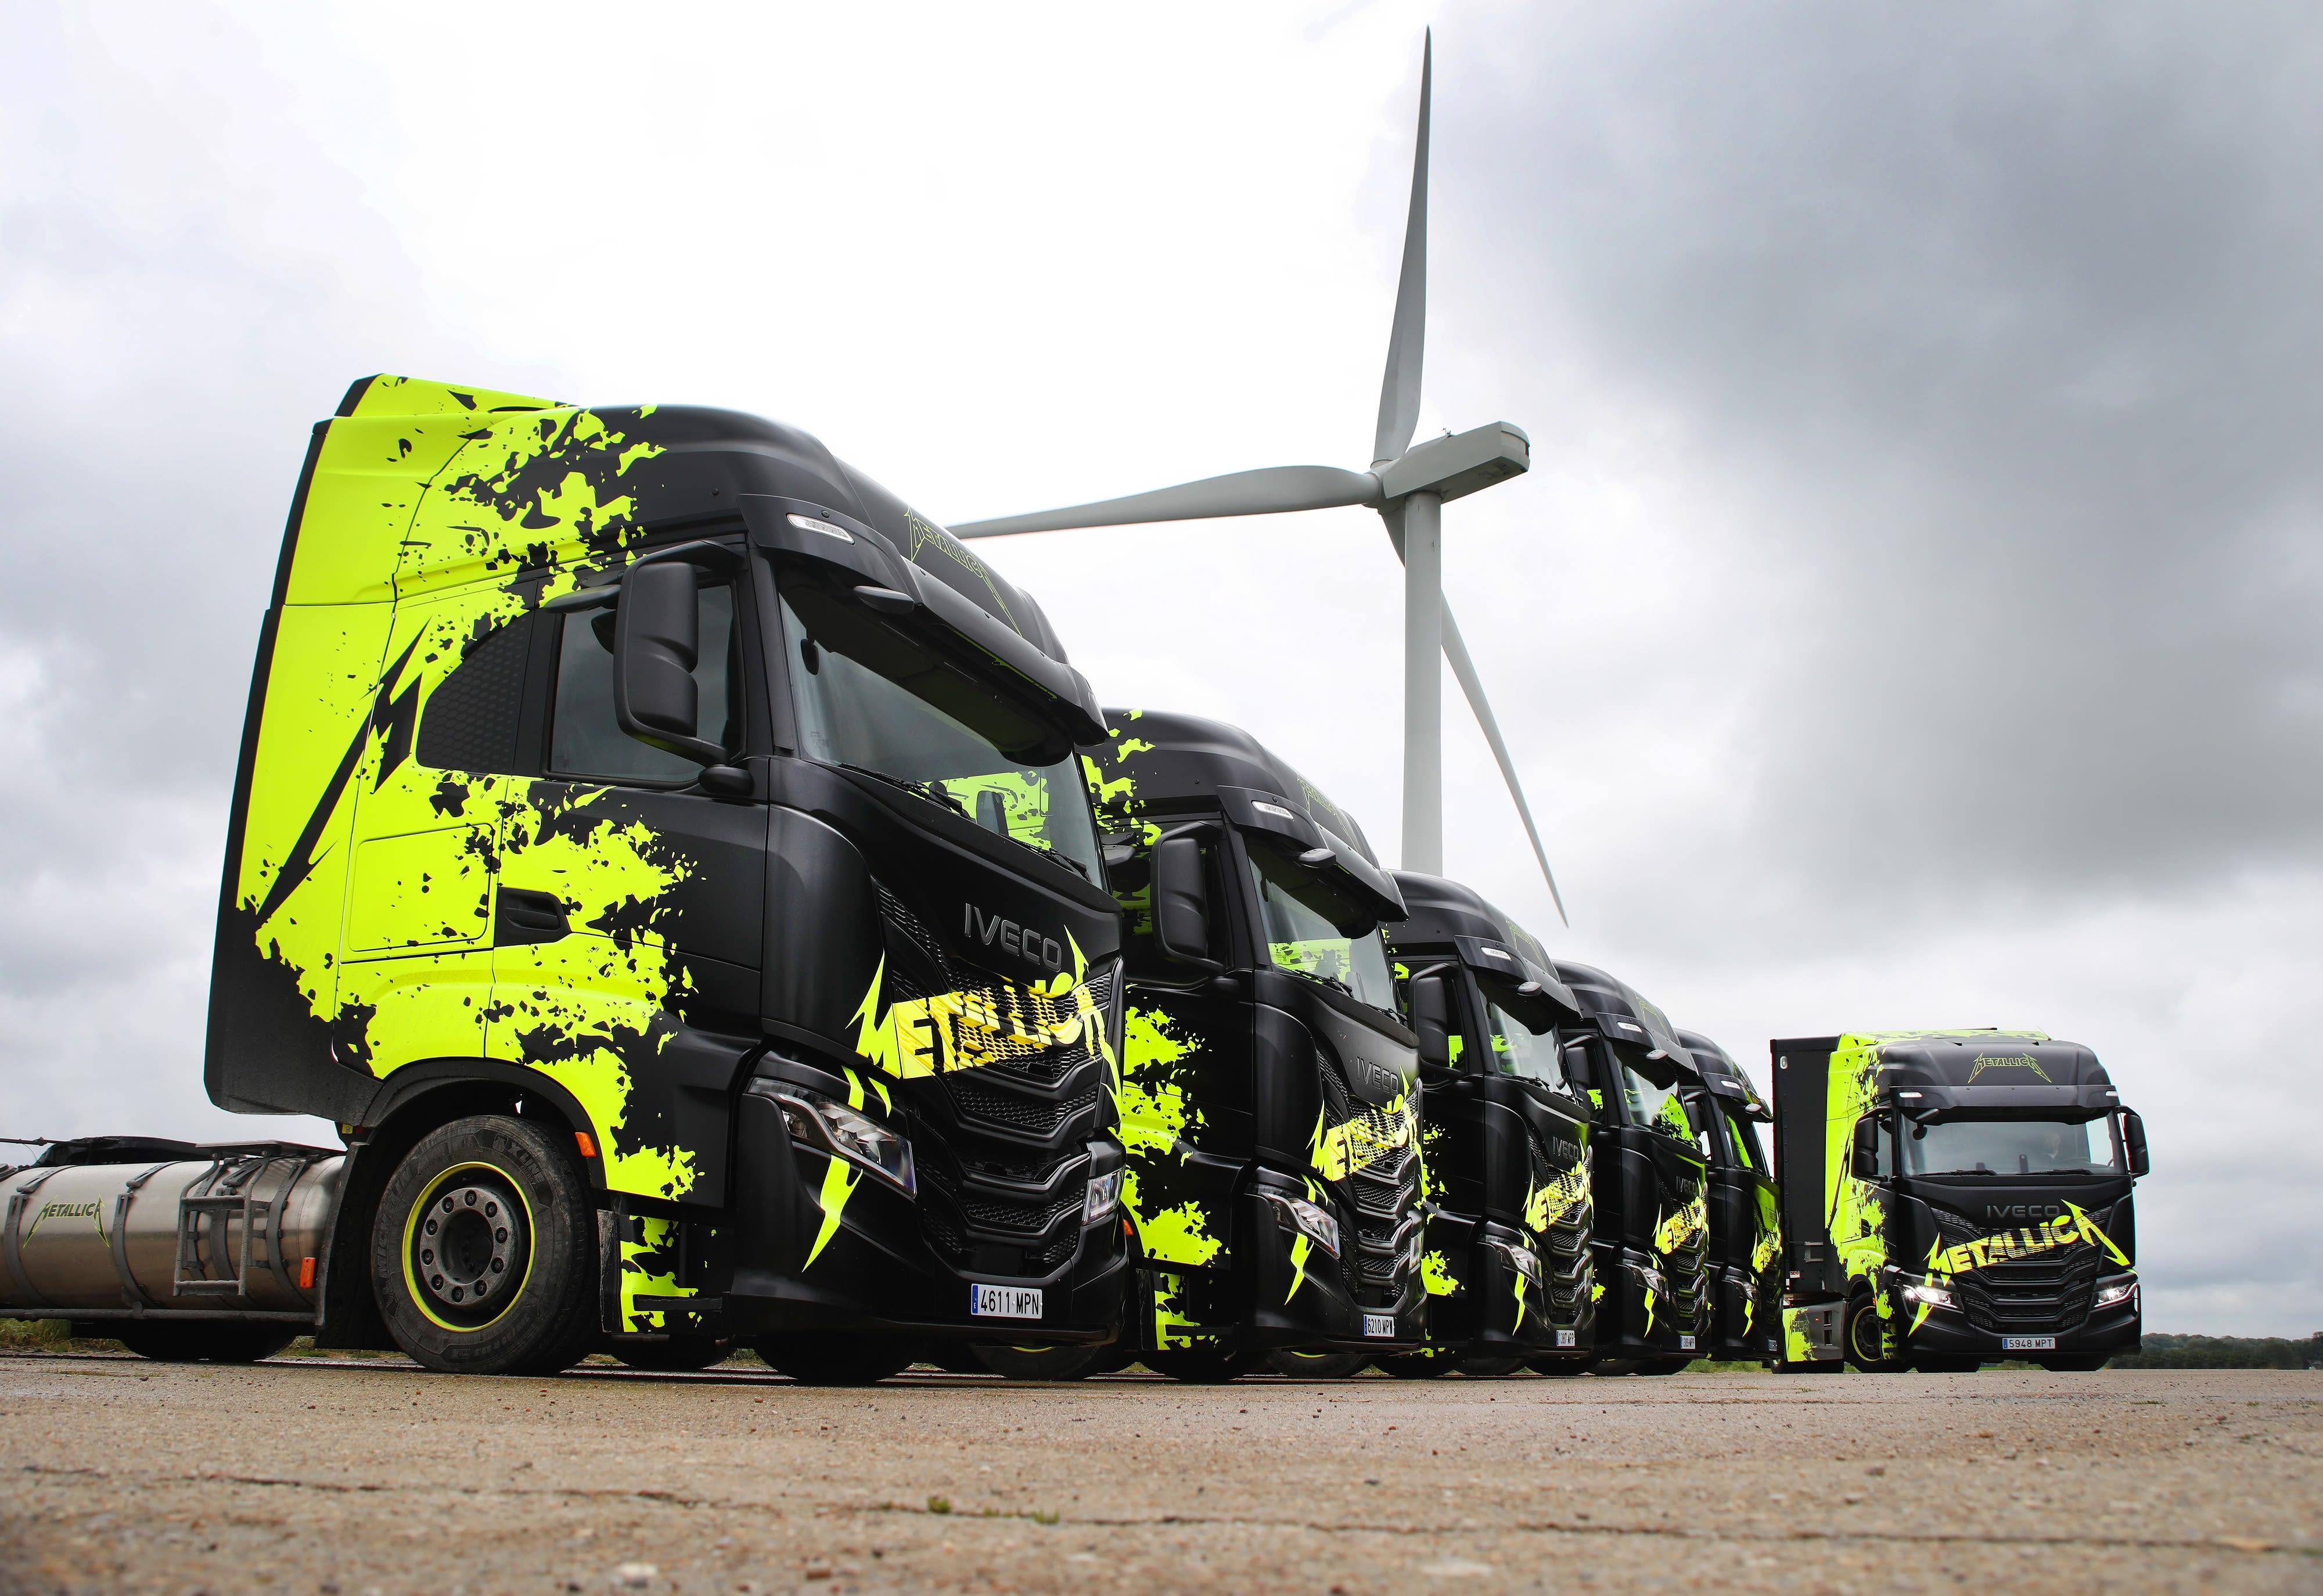 Metallica’s eco-friendly tour and the future of sustainable trucking